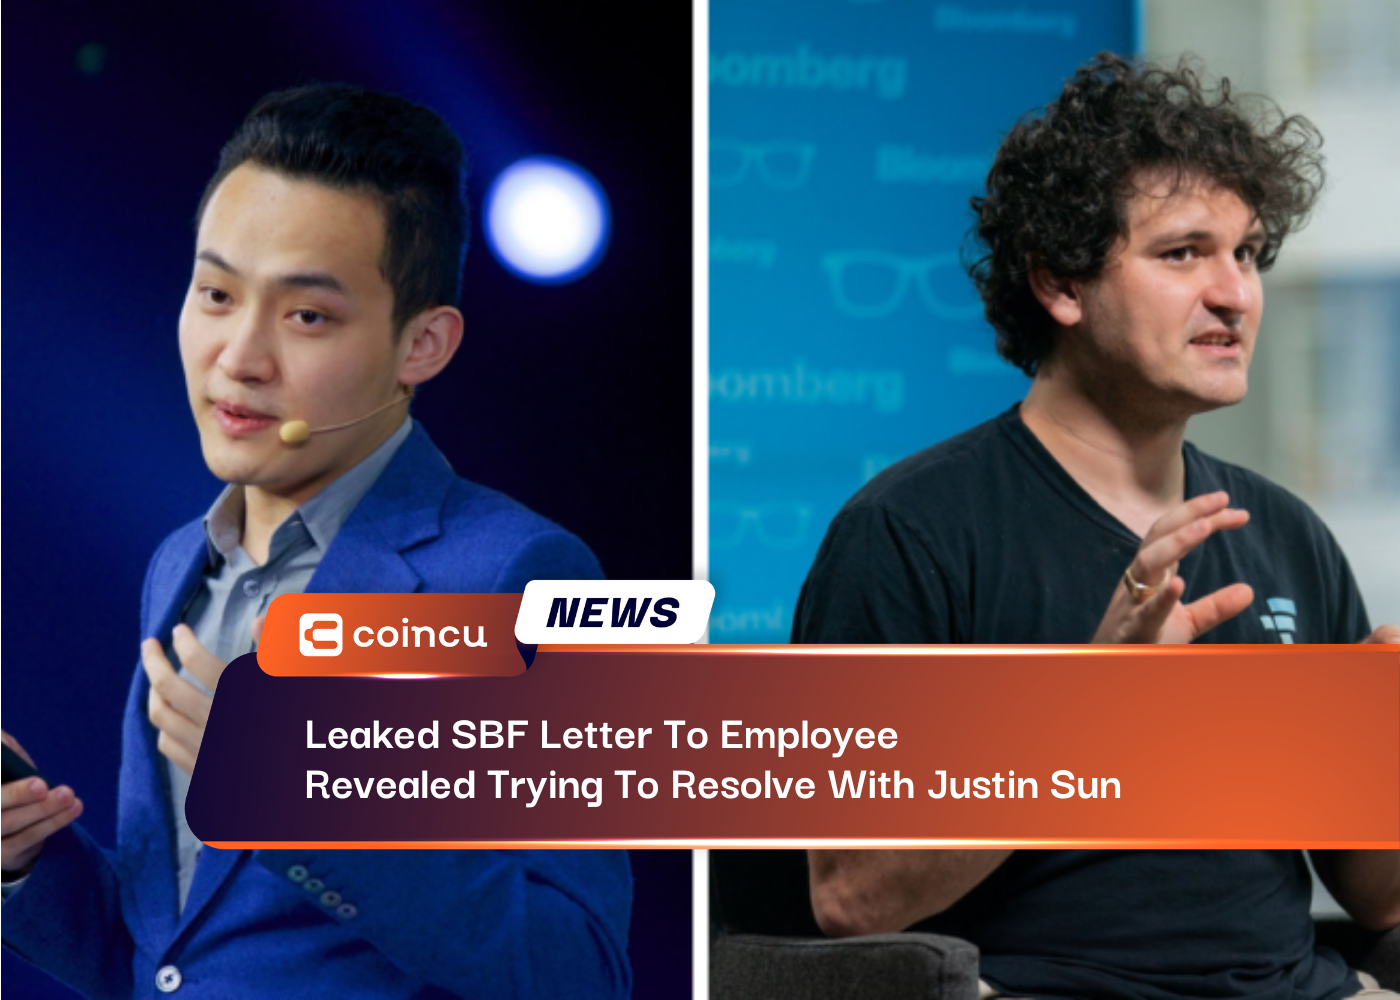 Leaked SBF Letter To Employee Revealed Trying To Resolve With Justin Sun